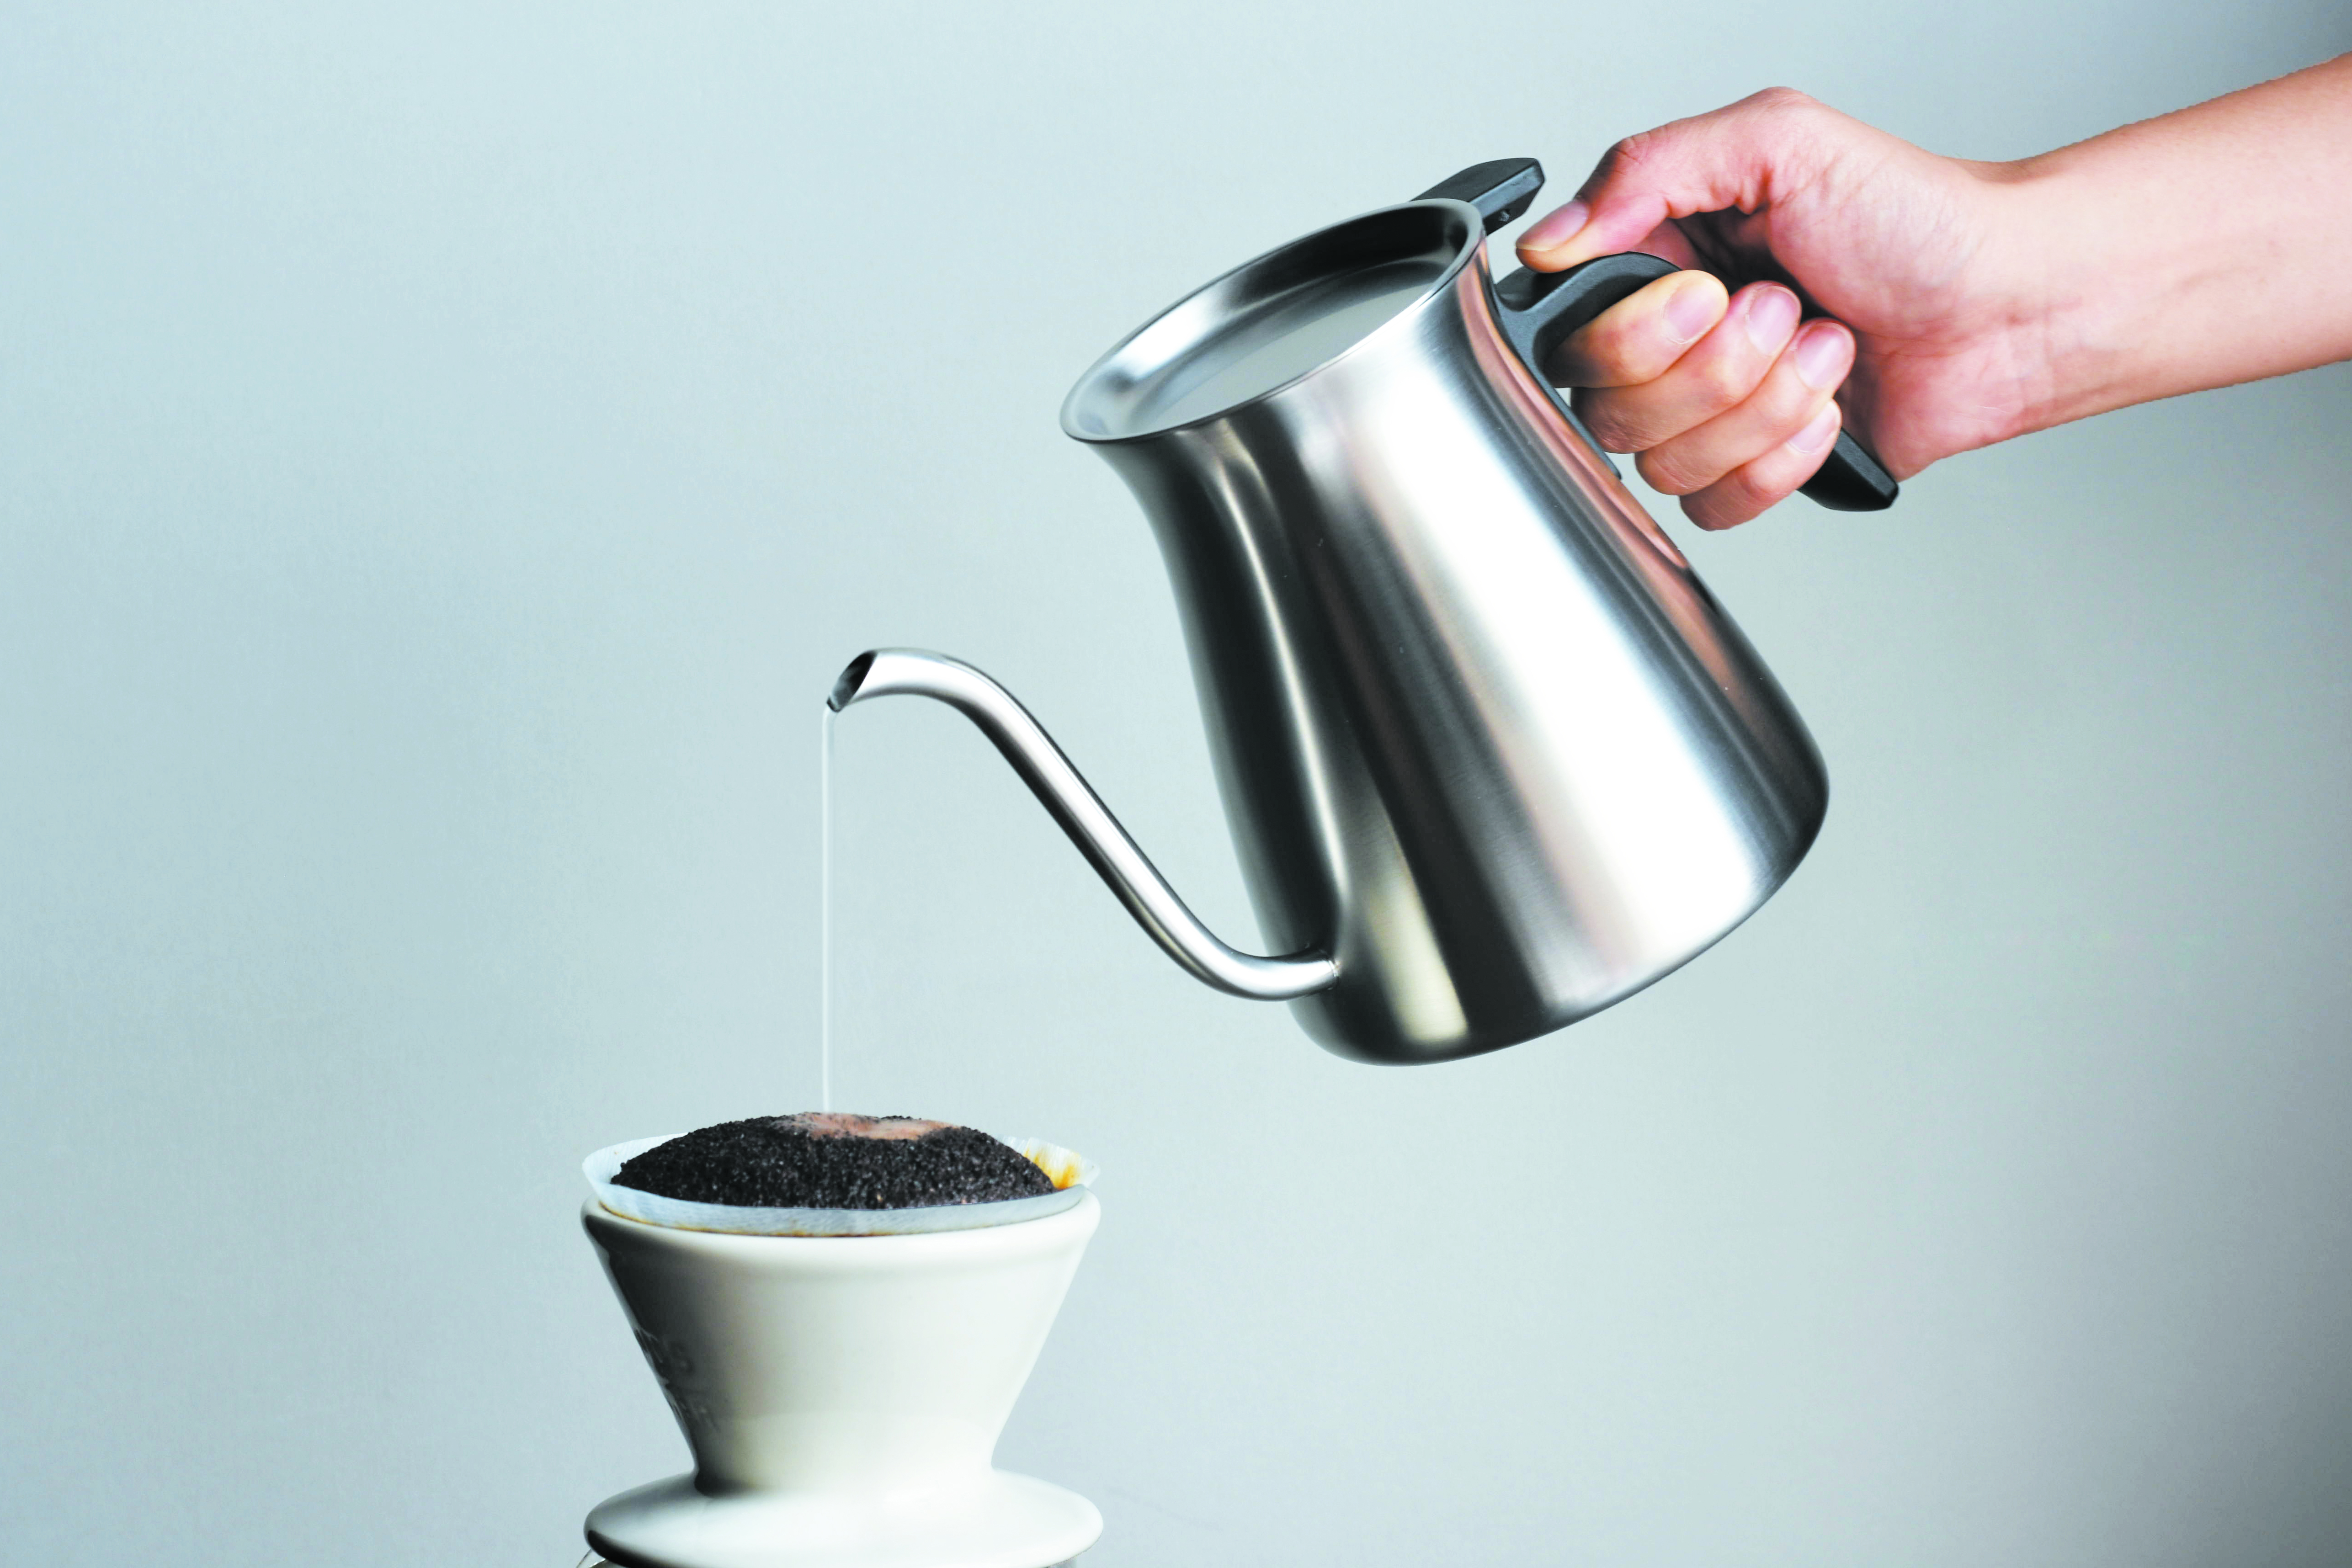 Pour over Kettle 900ml mirror